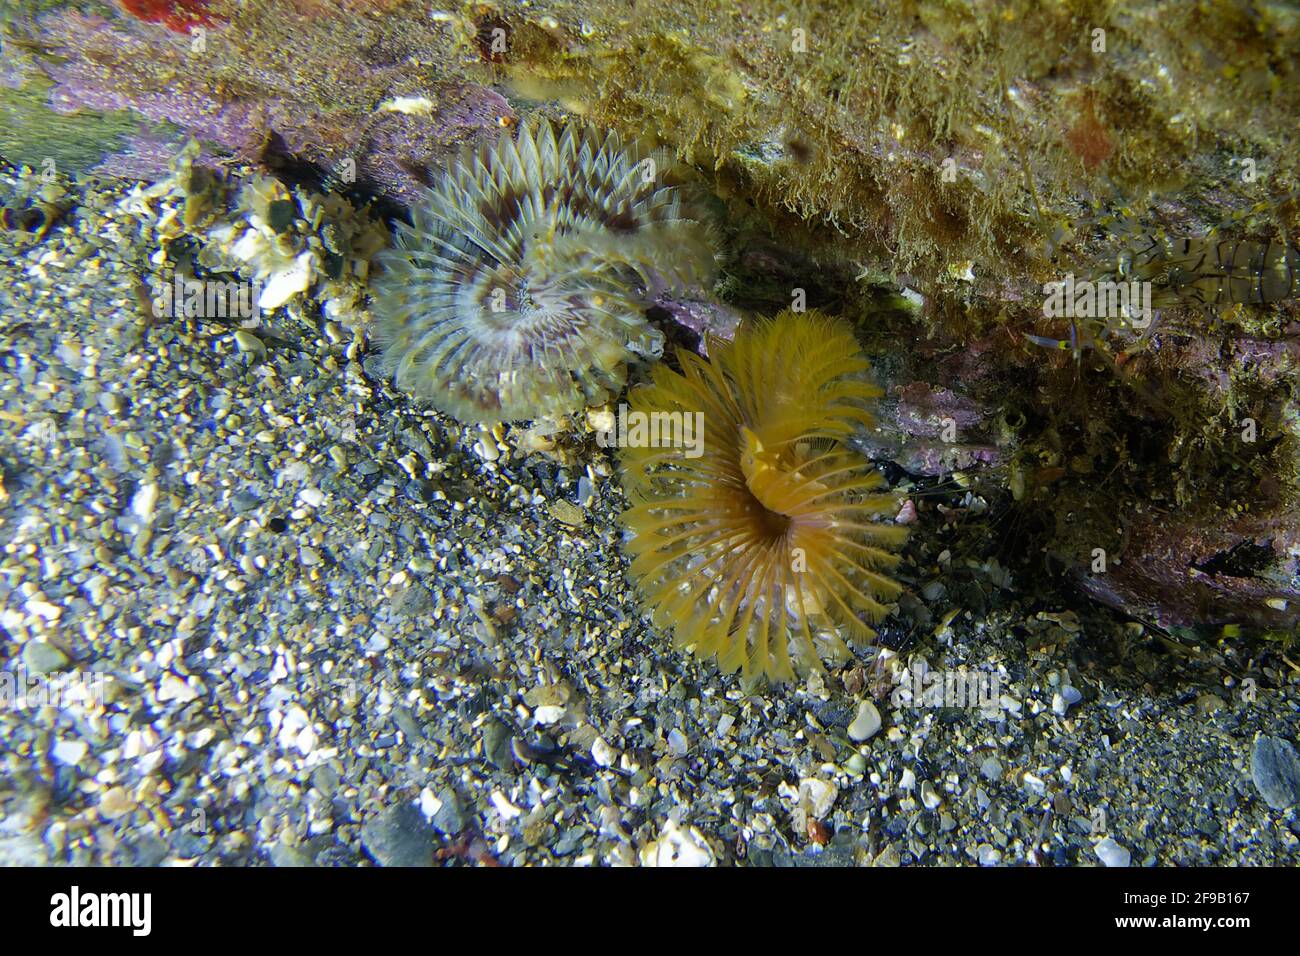 Two Fan worms (Megalomma vesiculosum) in Mediterranean Sea Stock Photo